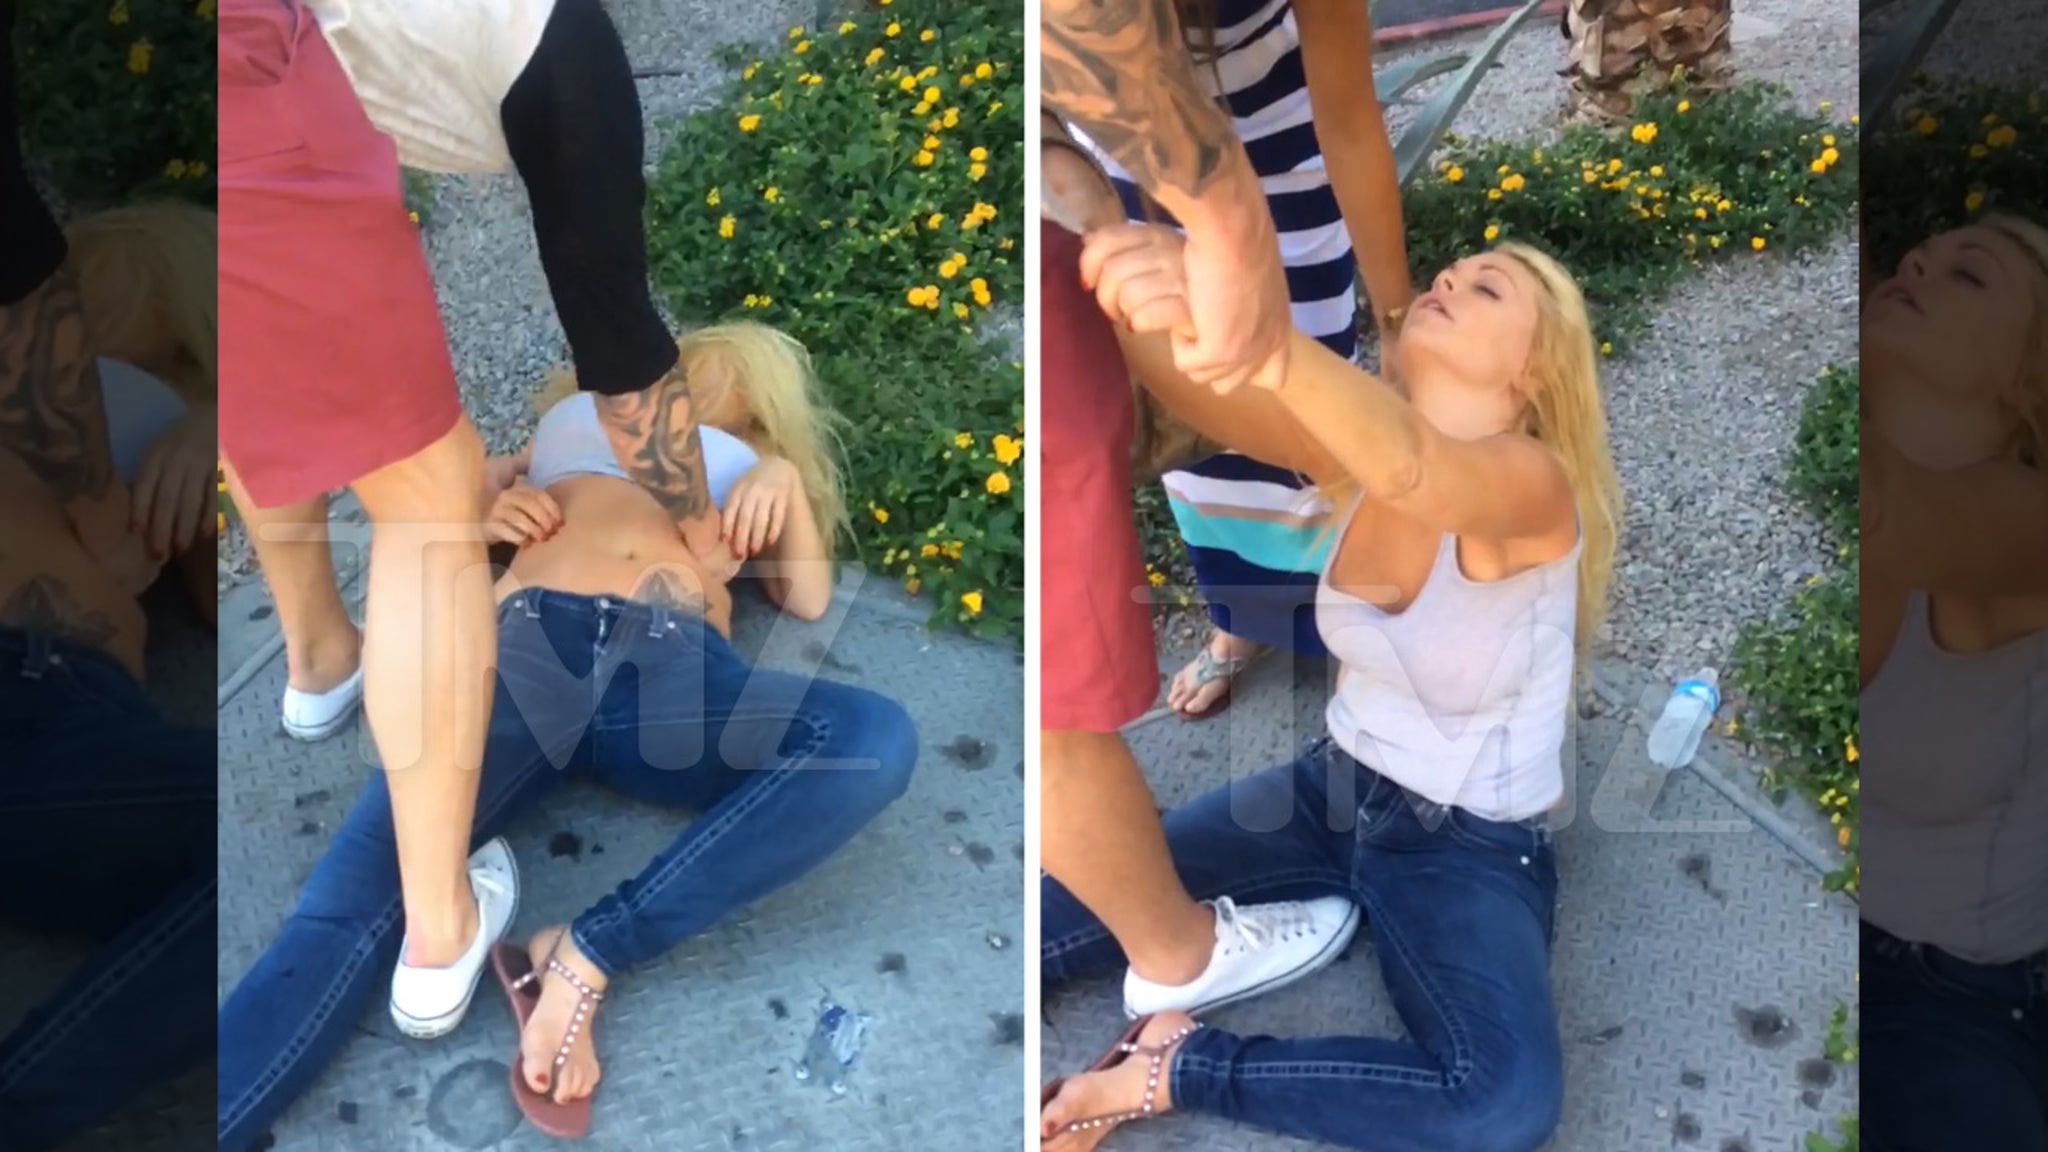 Passed Out Drunk Porn - Porn Star Jesse Jane -- Passed OUT COLD On the Vegas Strip! (VIDEO)